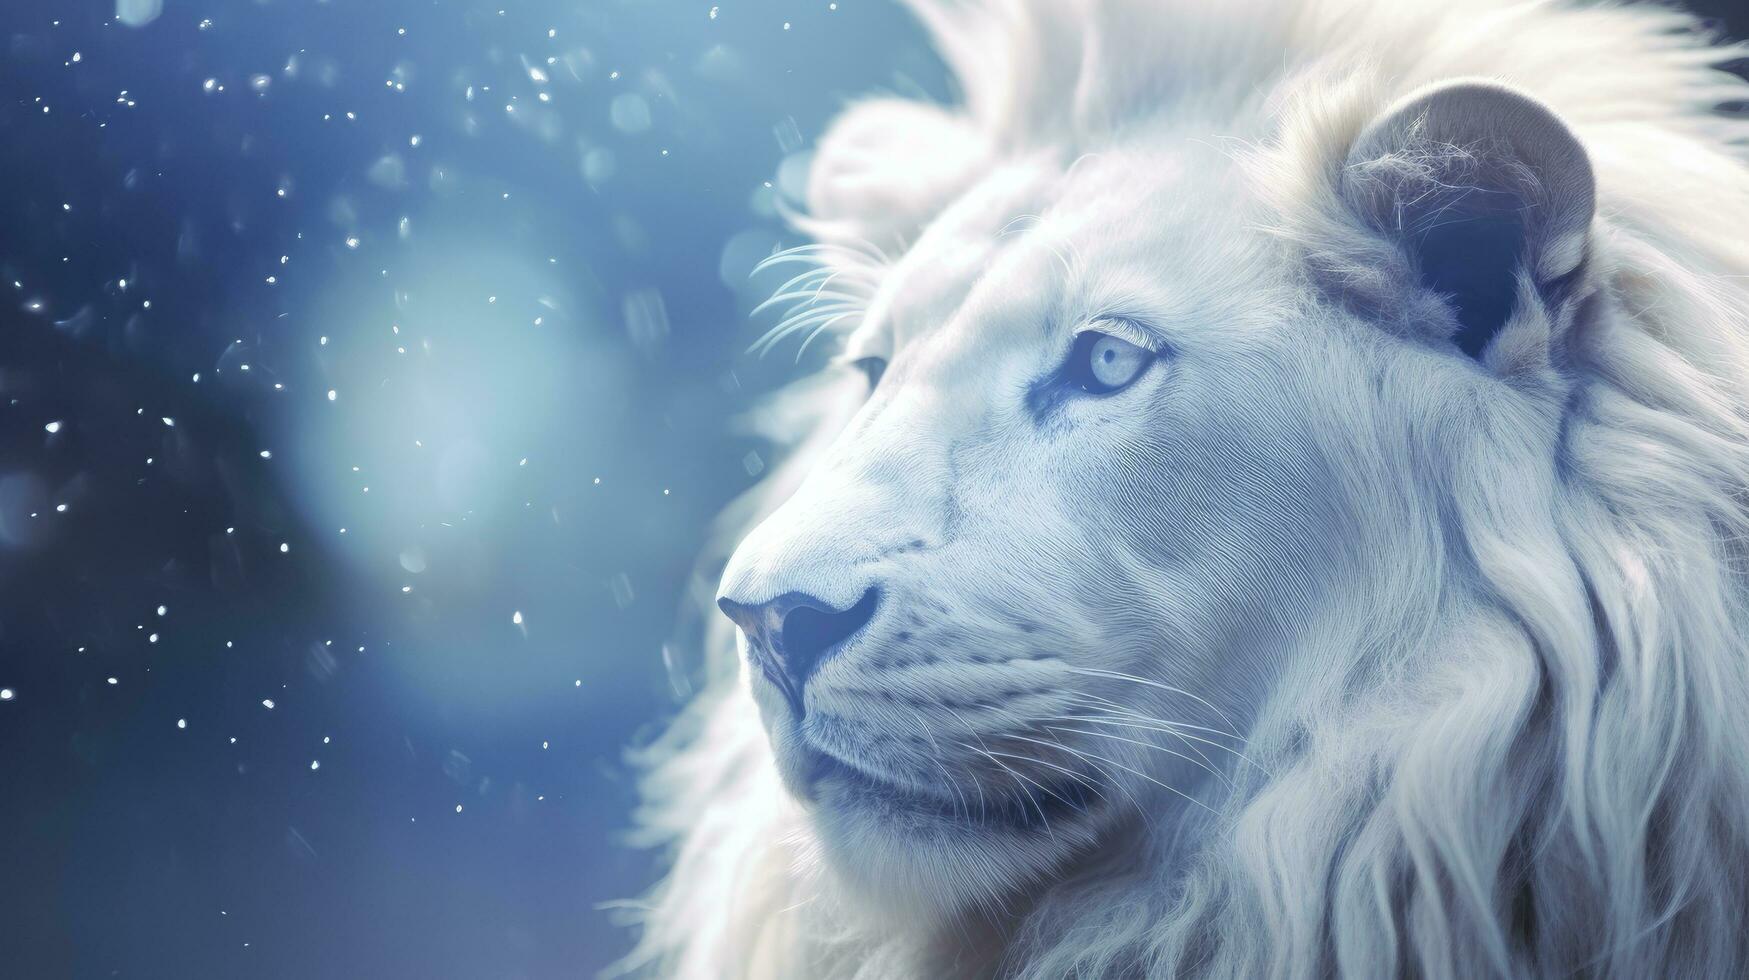 AI generated A White Lion Captured in Blue Iridescent Hues, Dark Romantic Style, Close-Up Shots, Featuring Glitter, Bokeh, and a Clean, Minimalist Aesthetic. photo